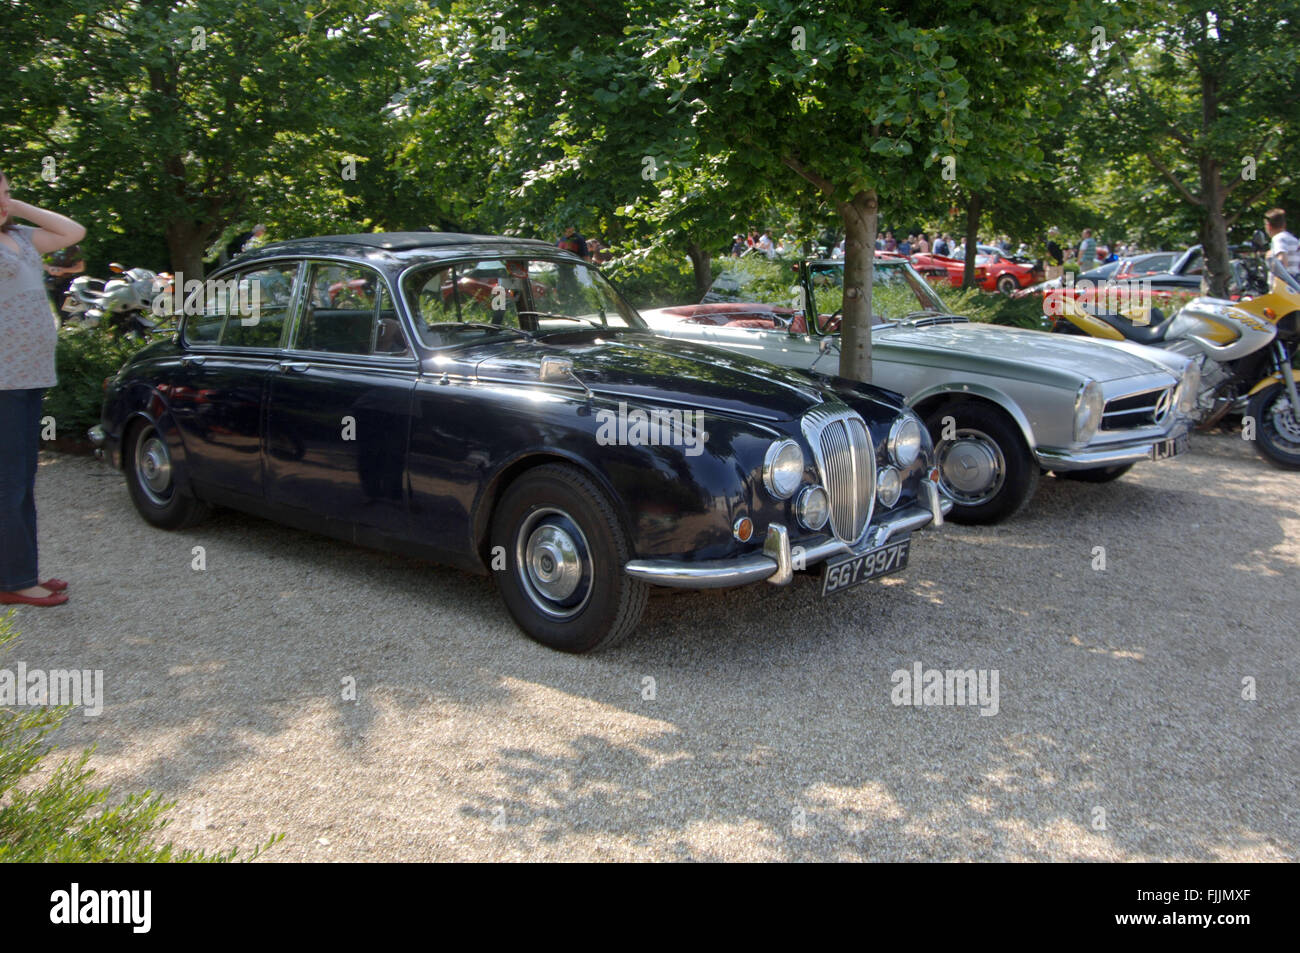 Classic super cars at a Goodwood Breakfast club meet, Daimler V8 and Mercedes Stock Photo